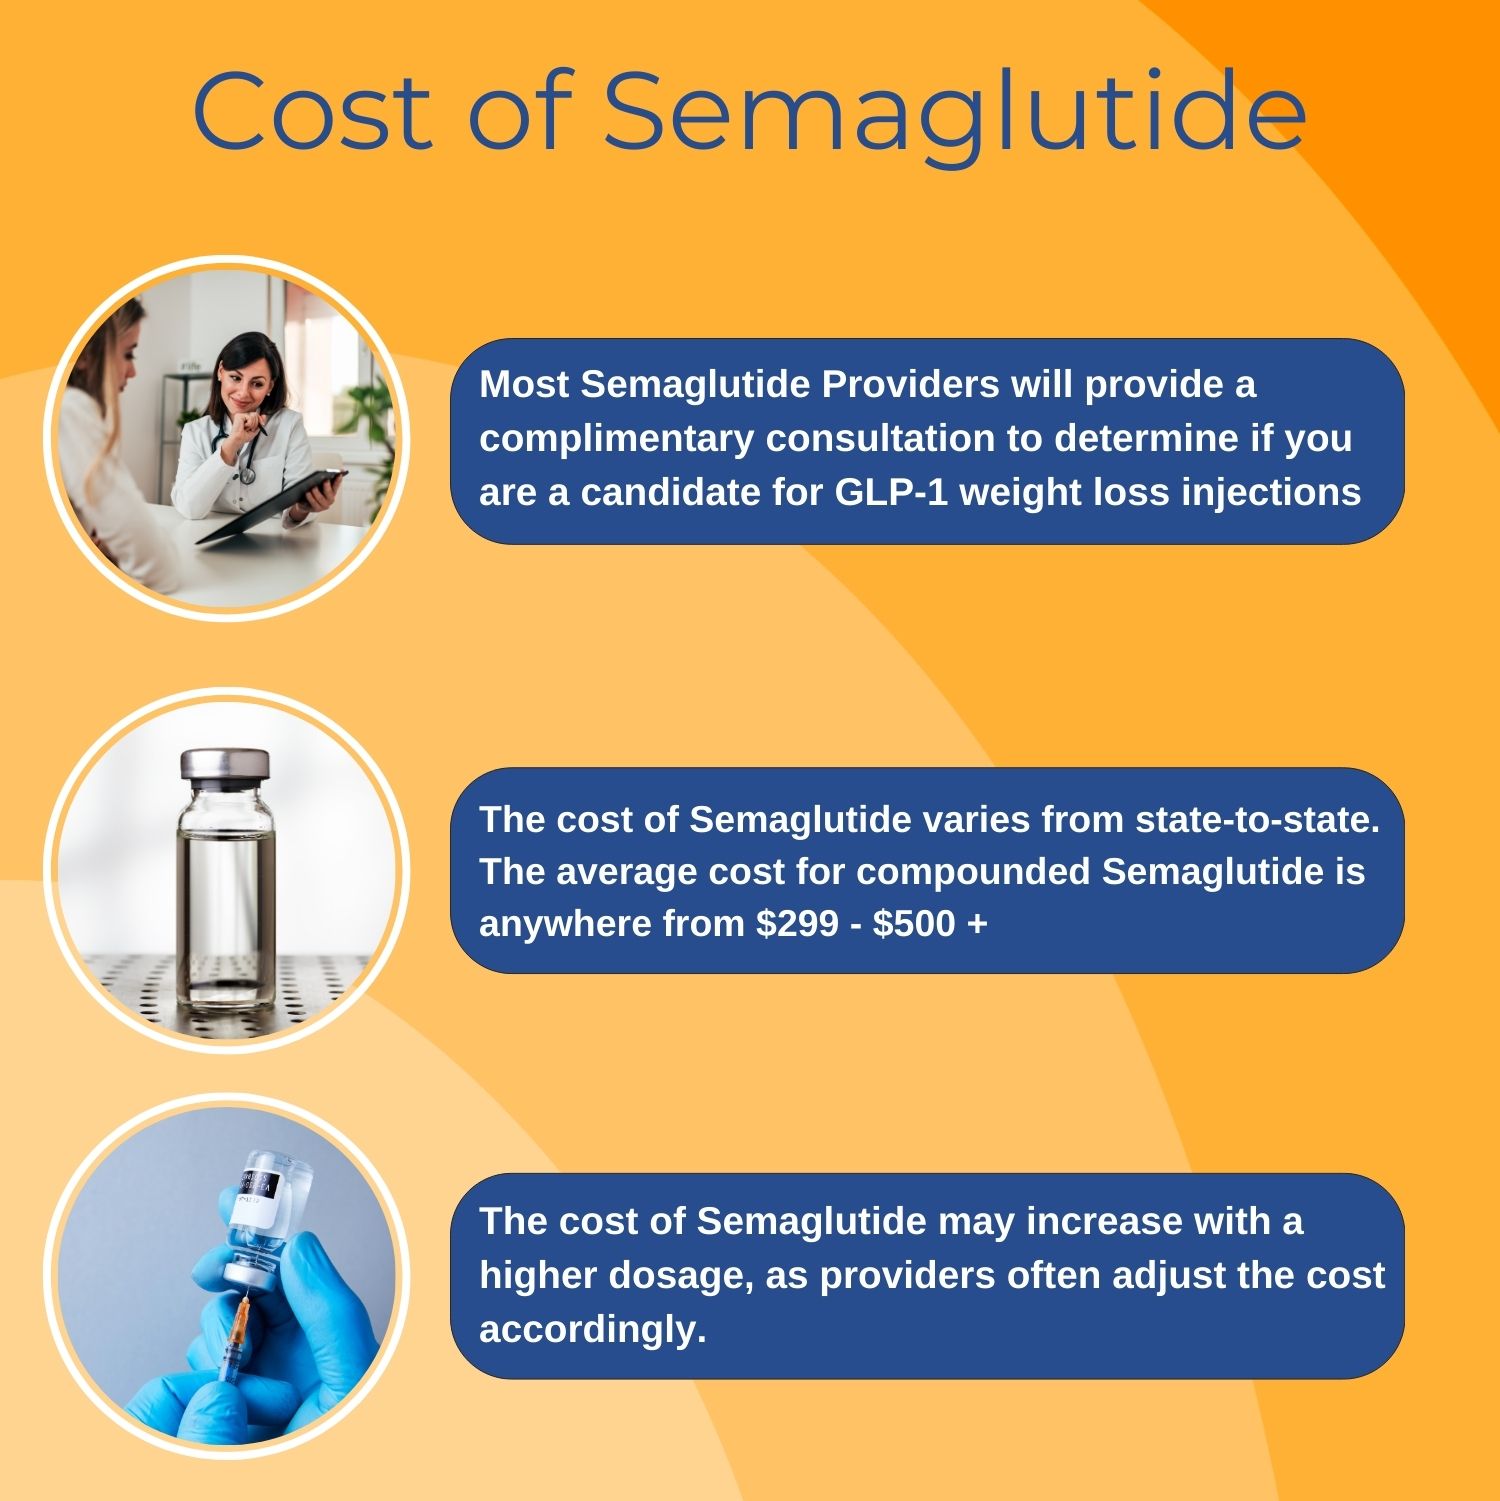 image of the cost of semaglutide